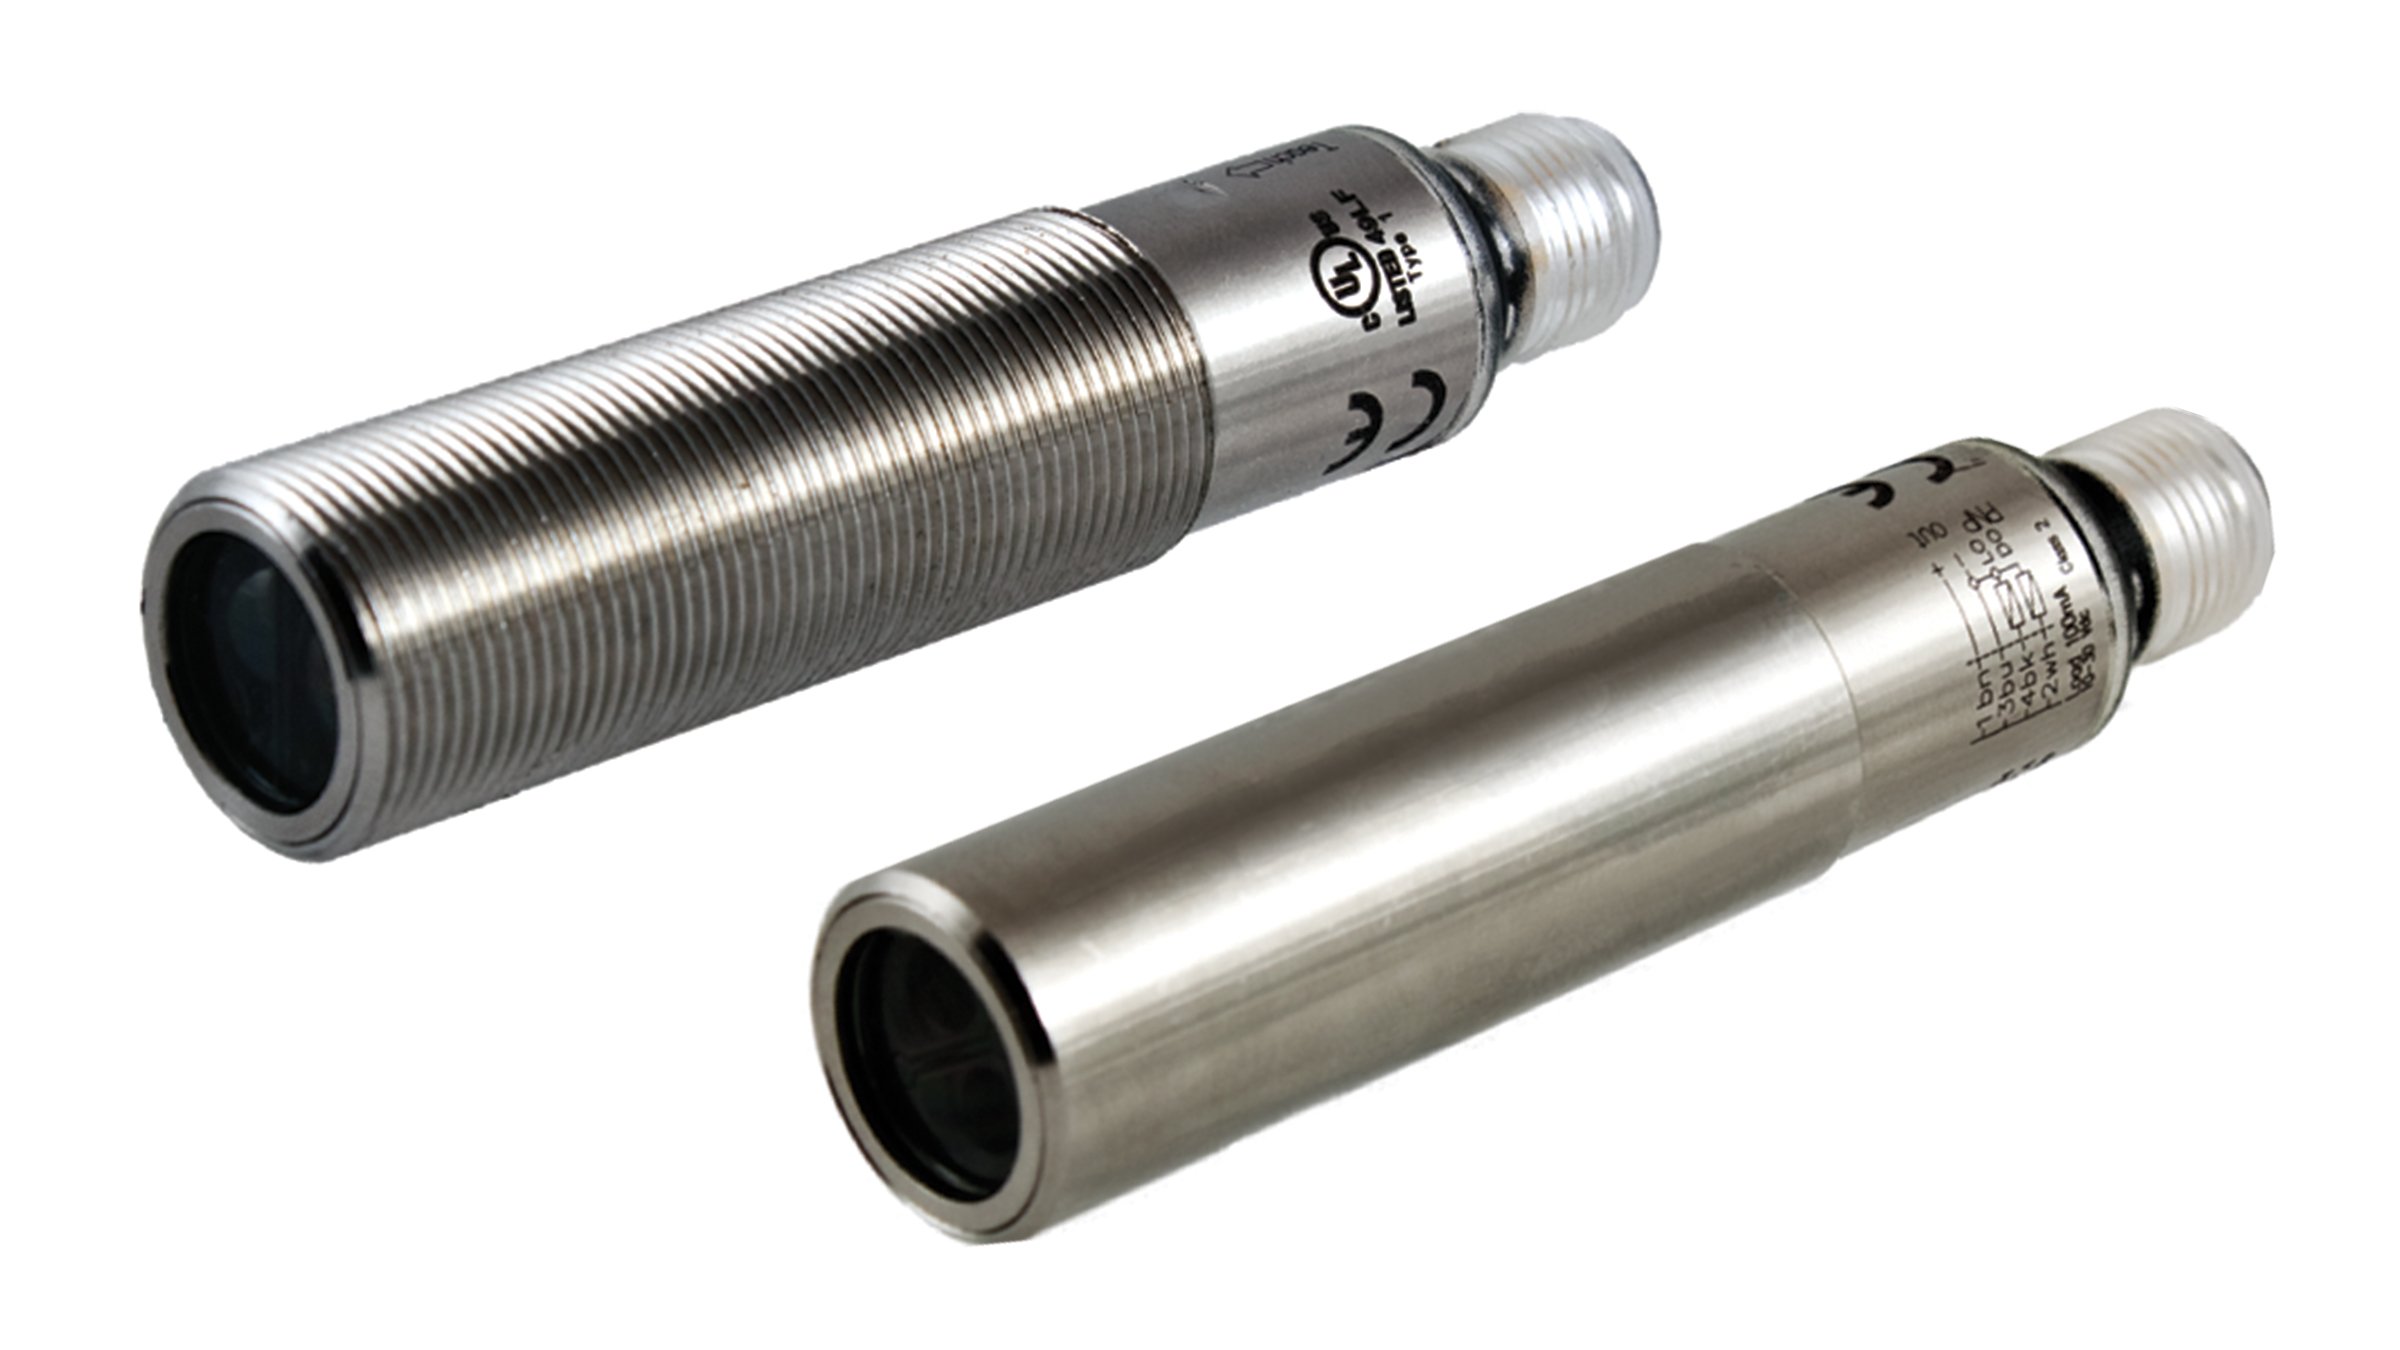 2 cylindrical, smooth stainless steel sensors